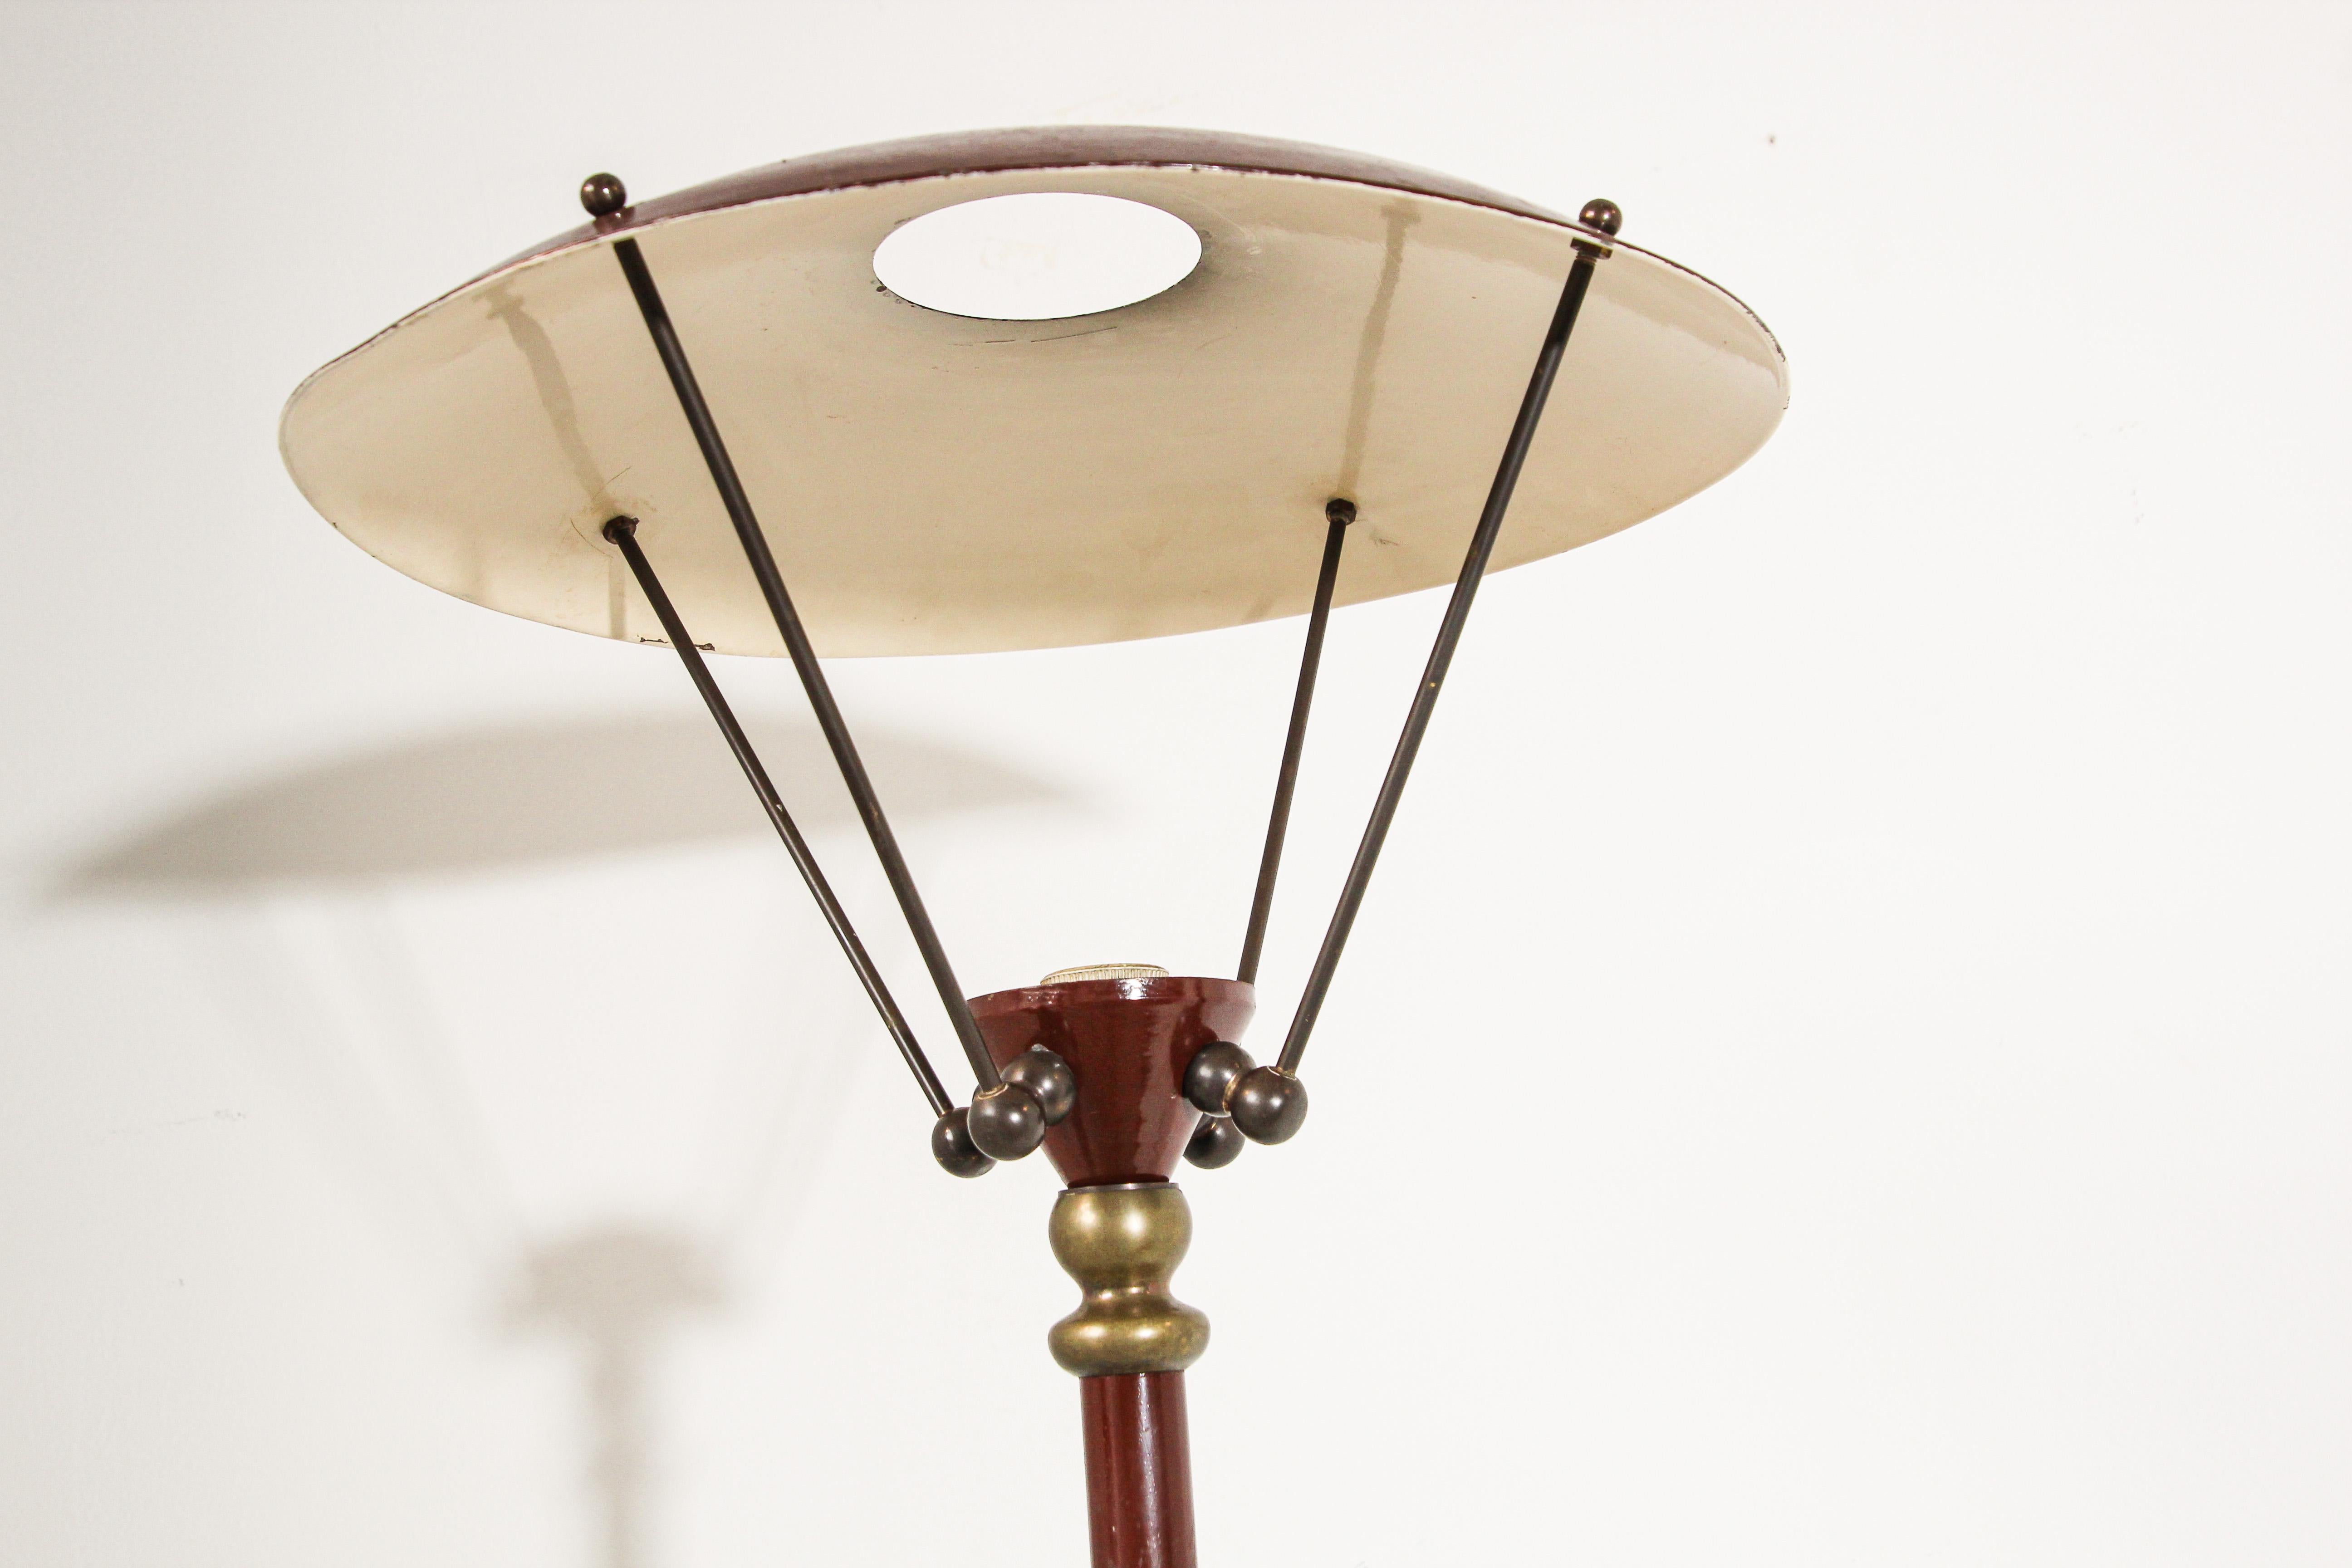 Vintage Sculptural French Tripod Floor Lamp Brown Enamel Shade, 1950s For Sale 2